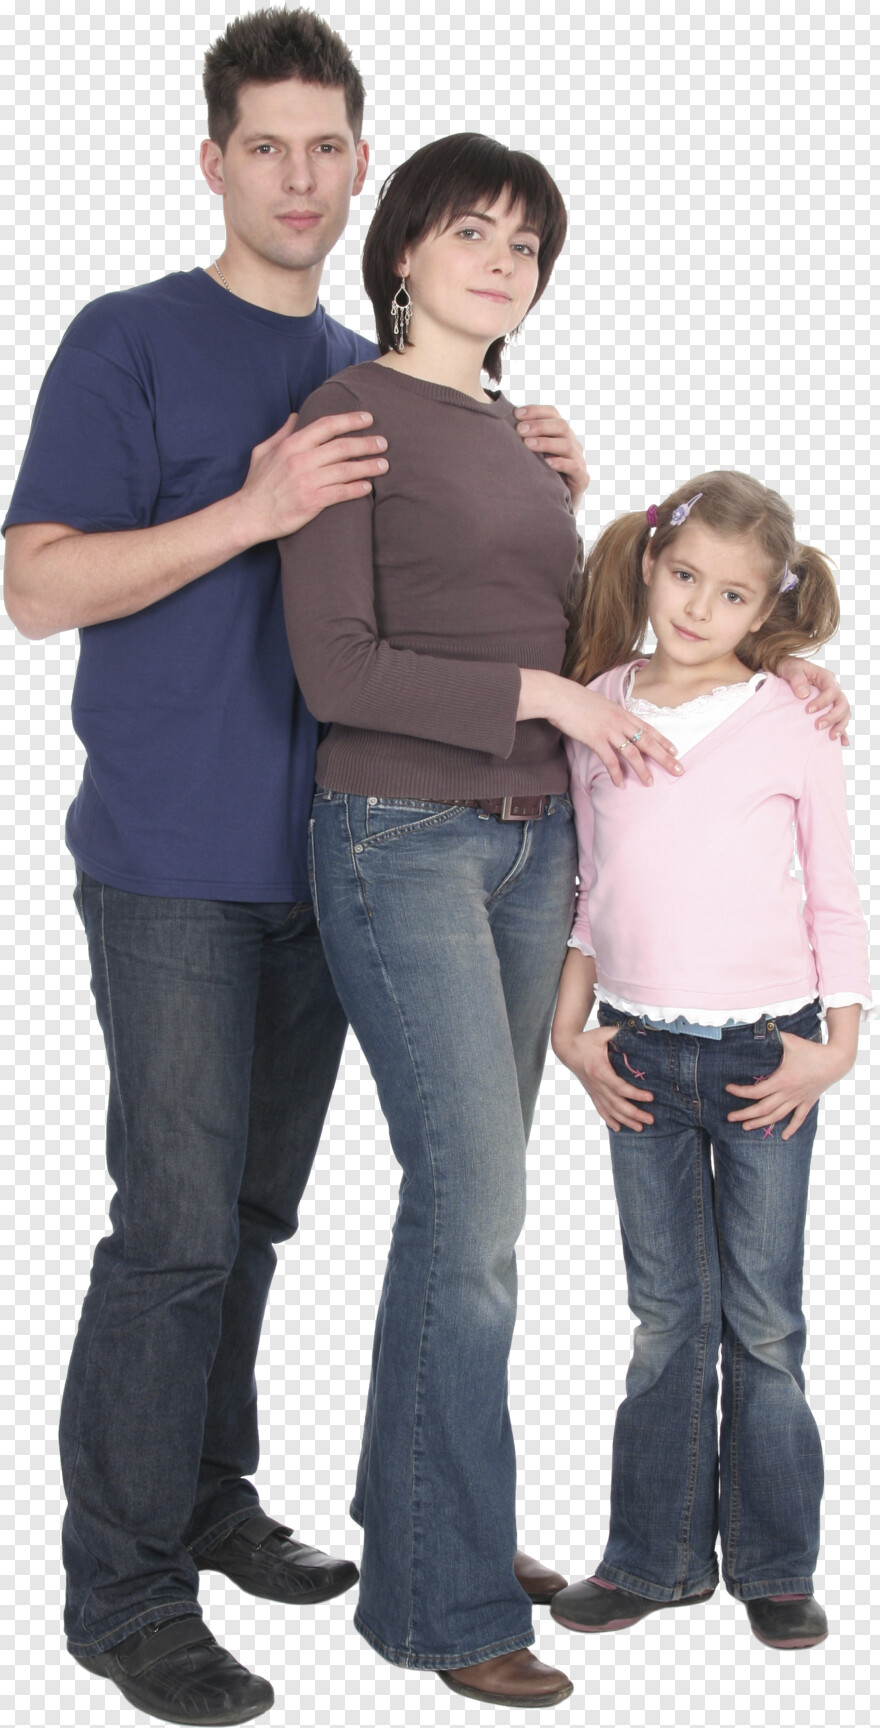 family-clipart # 1024489